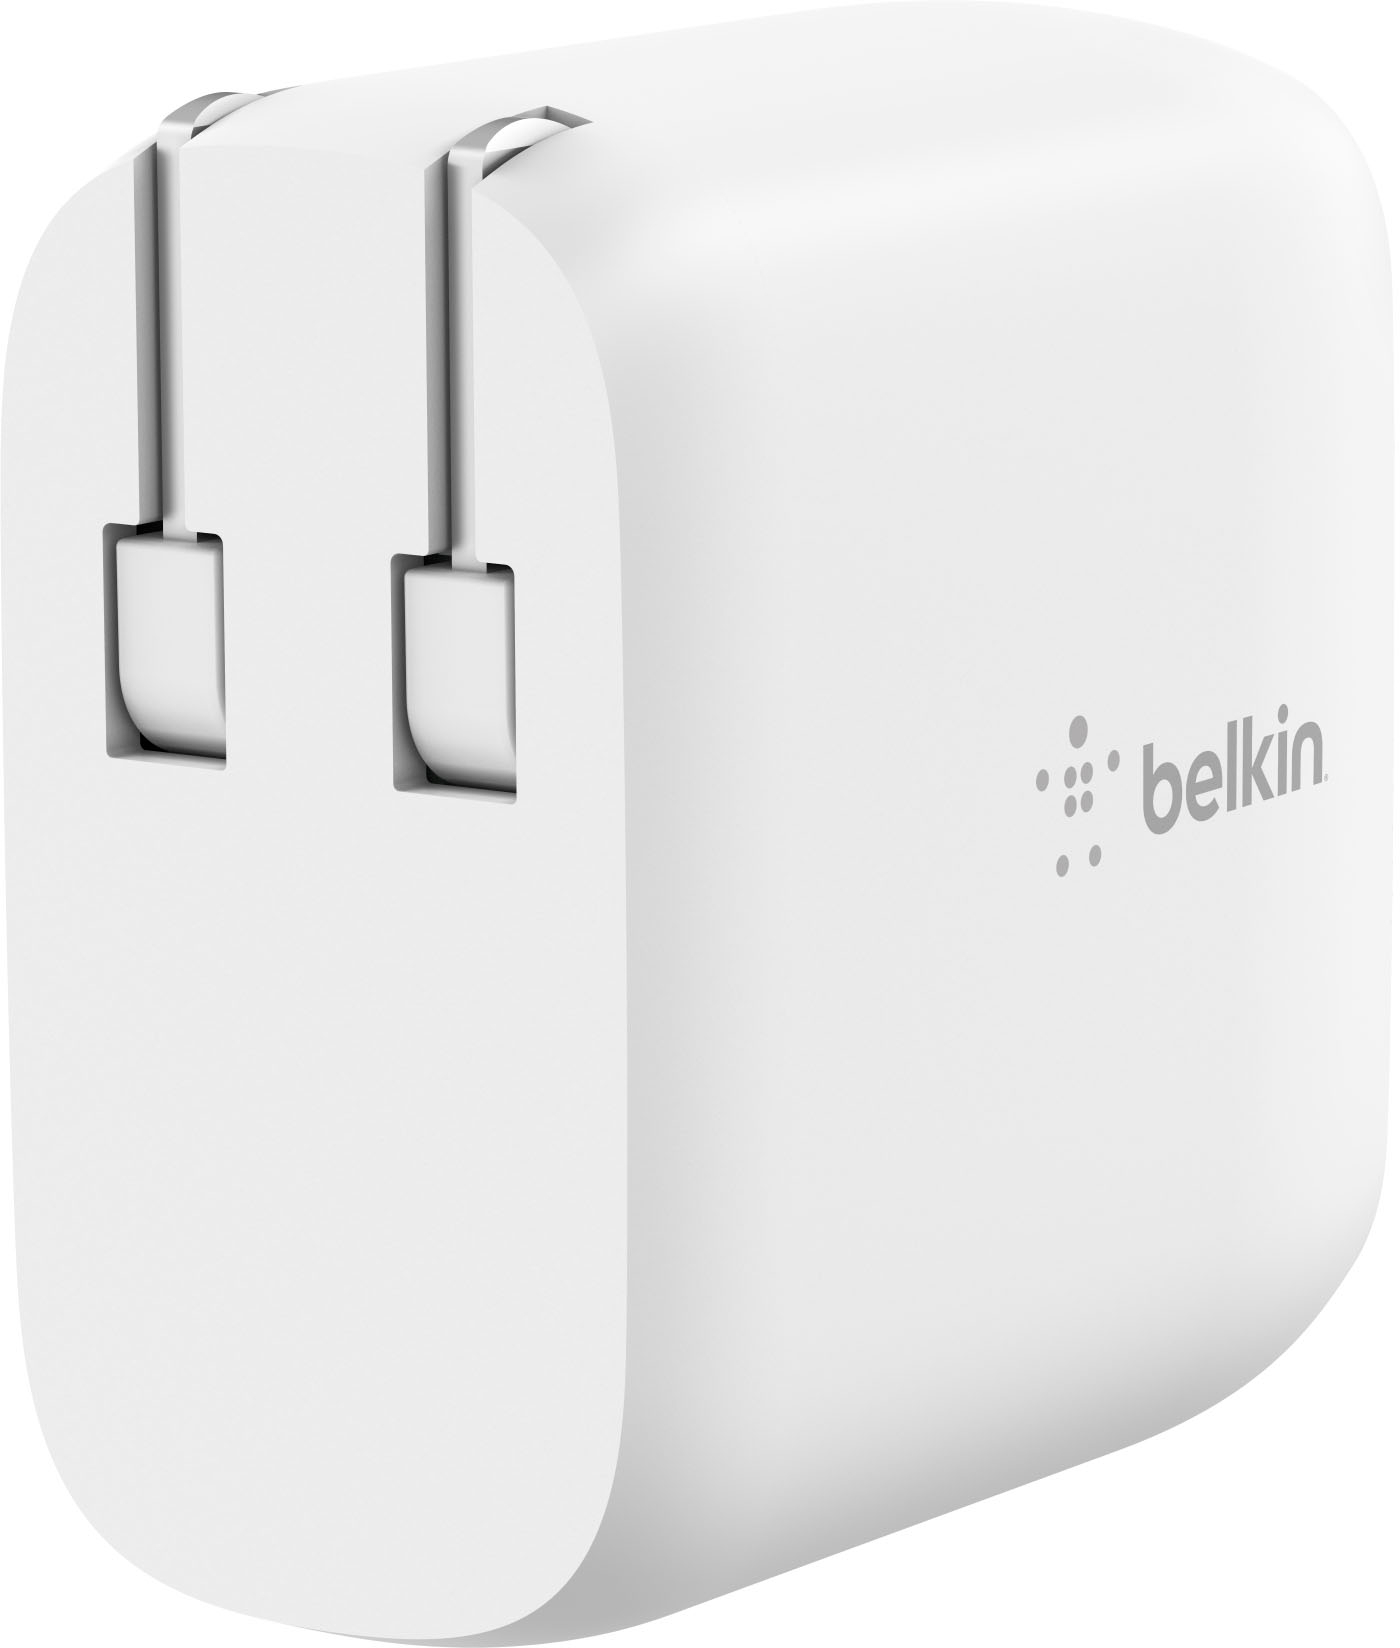 Belkin 24W Dual Port USB Wall Charger with USB C Cable Fast